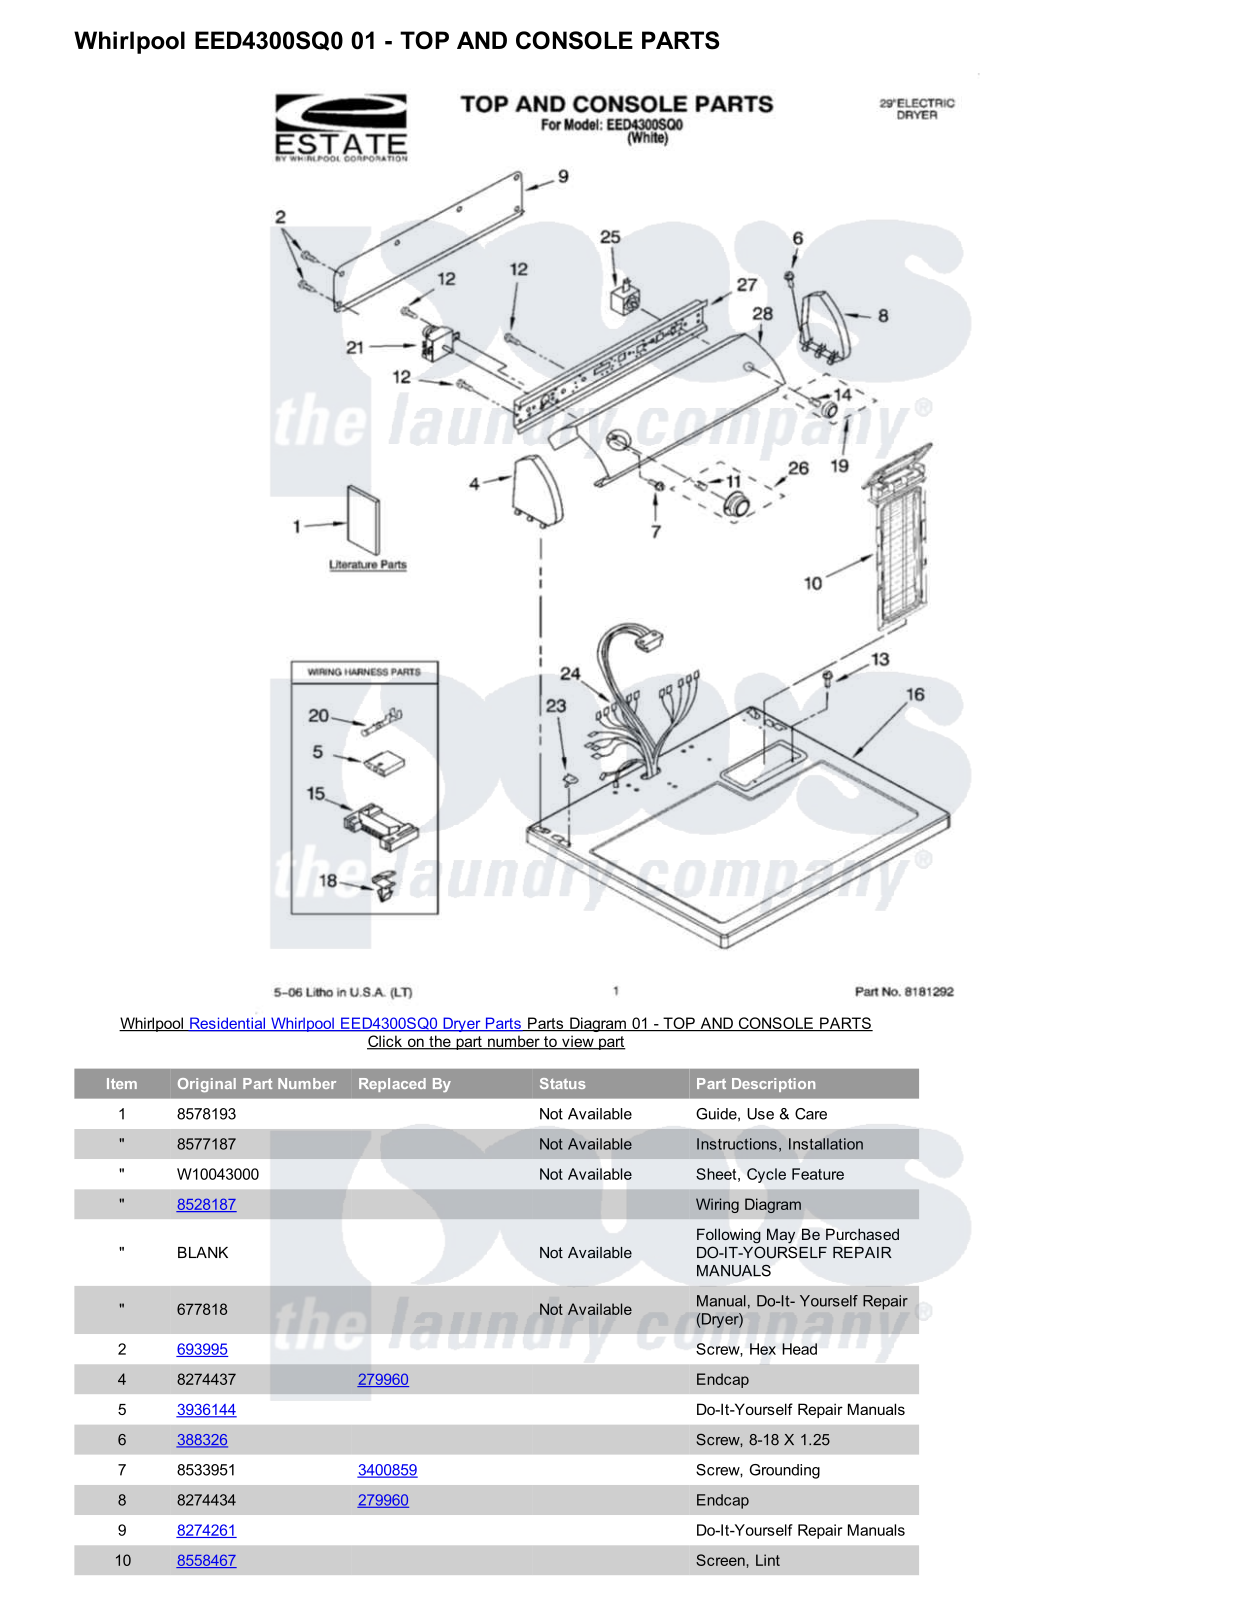 Whirlpool EED4300SQ0 Parts Diagram